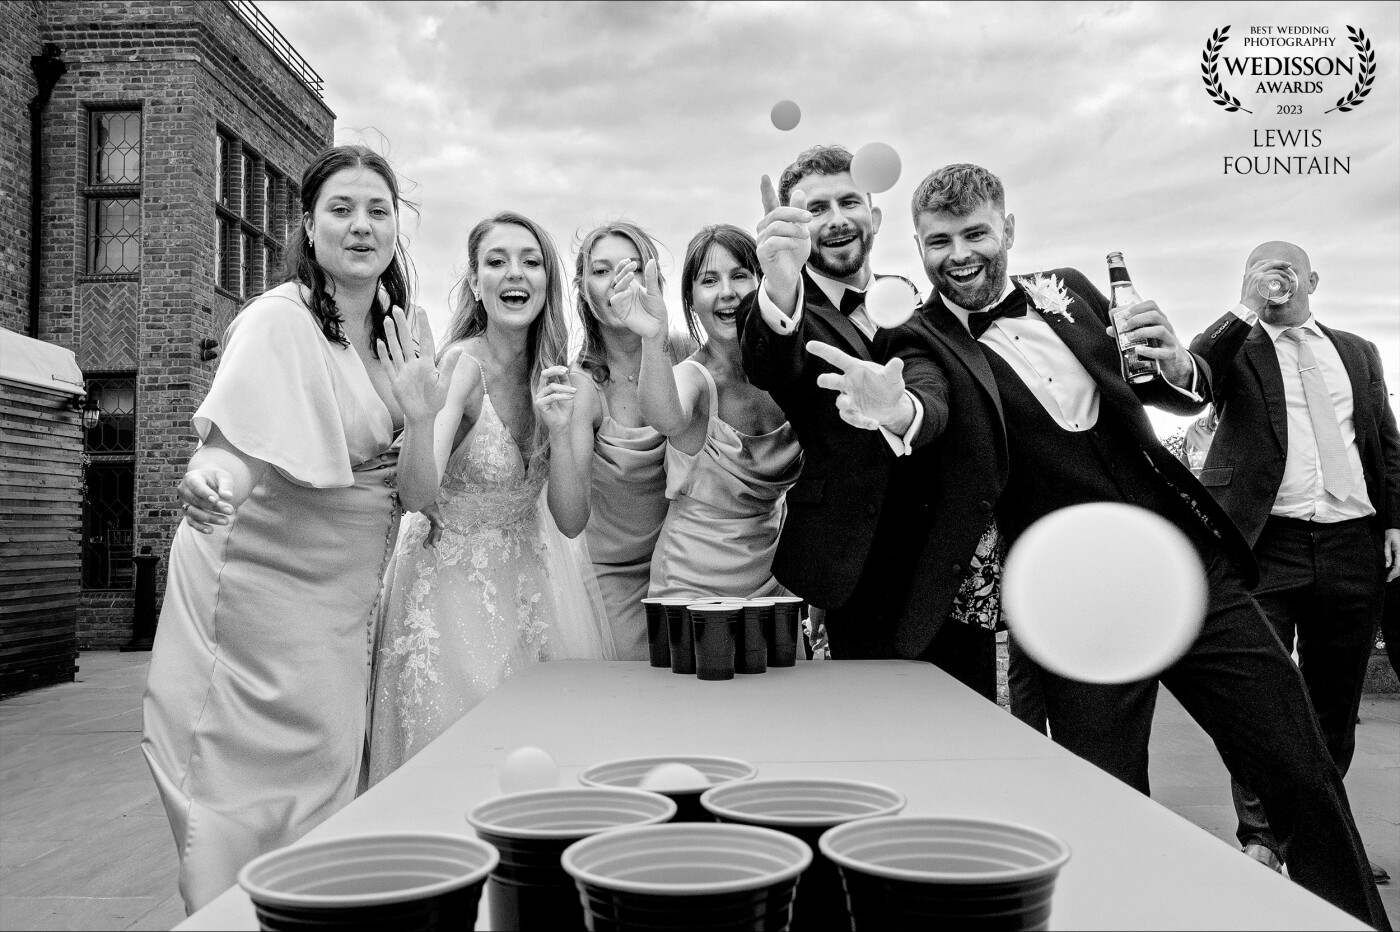 You can’t beat a good game of beer pong whilst waiting for the evenings party to start. <br />
<br />
Therese & Michael partied late in to the night at The Old Hall Ely, a wedding we won’t forget 😊